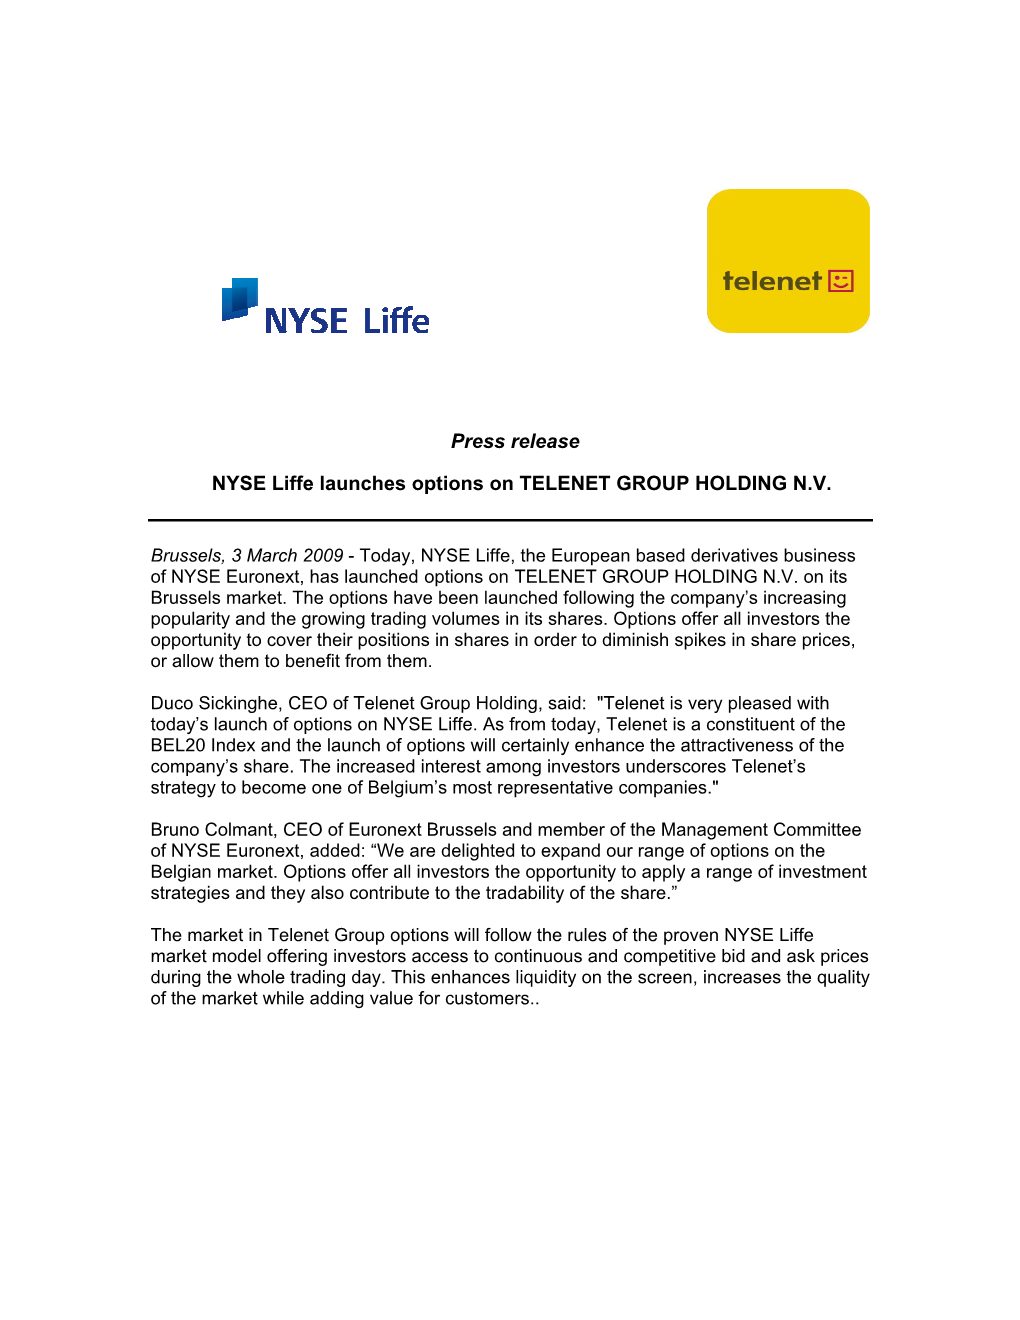 Press Release NYSE Liffe Launches Options on TELENET GROUP HOLDING N.V